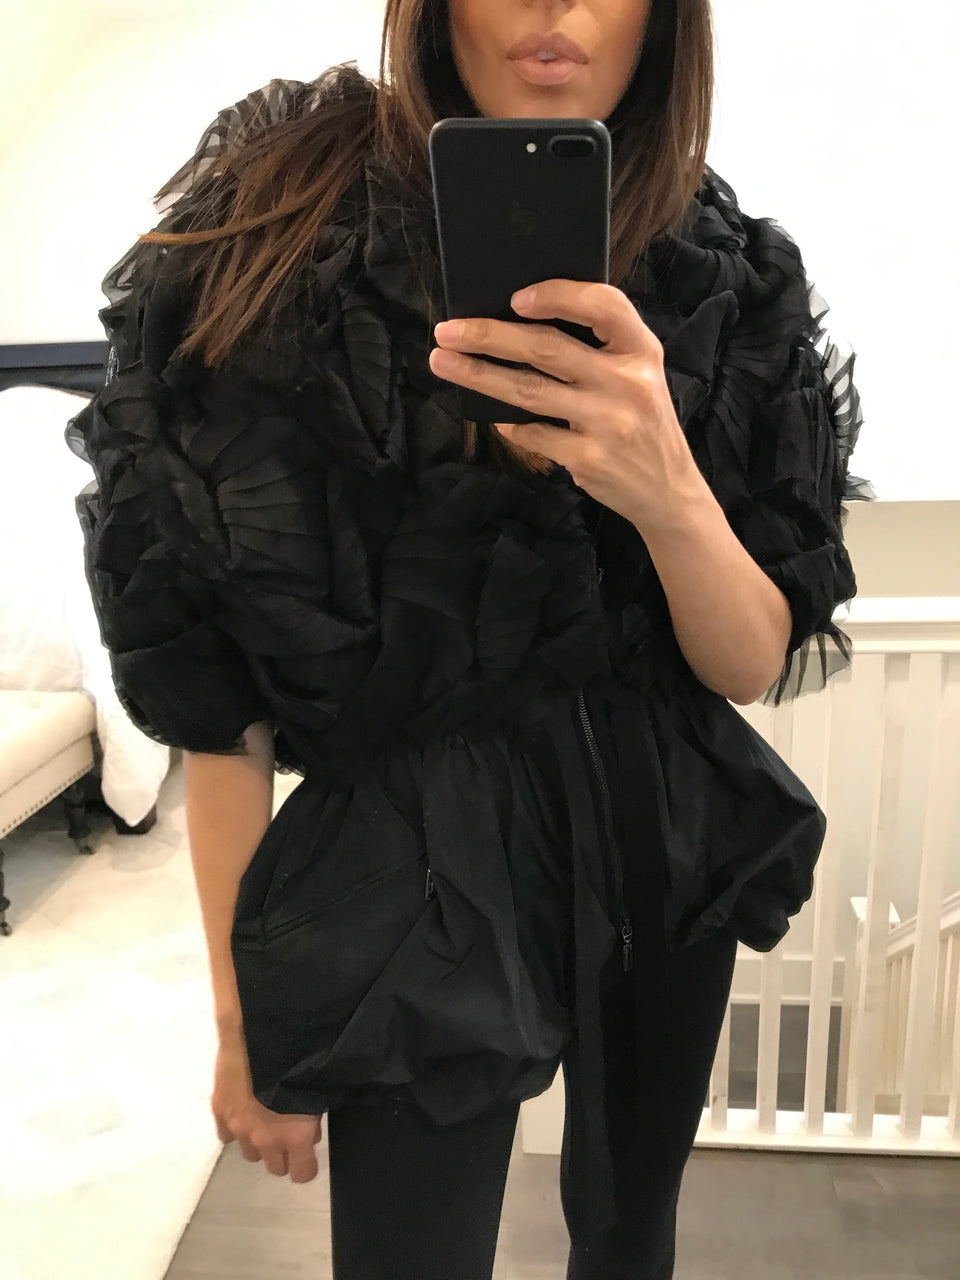 Limited Edition Ruffle Top Zip Up Jacket